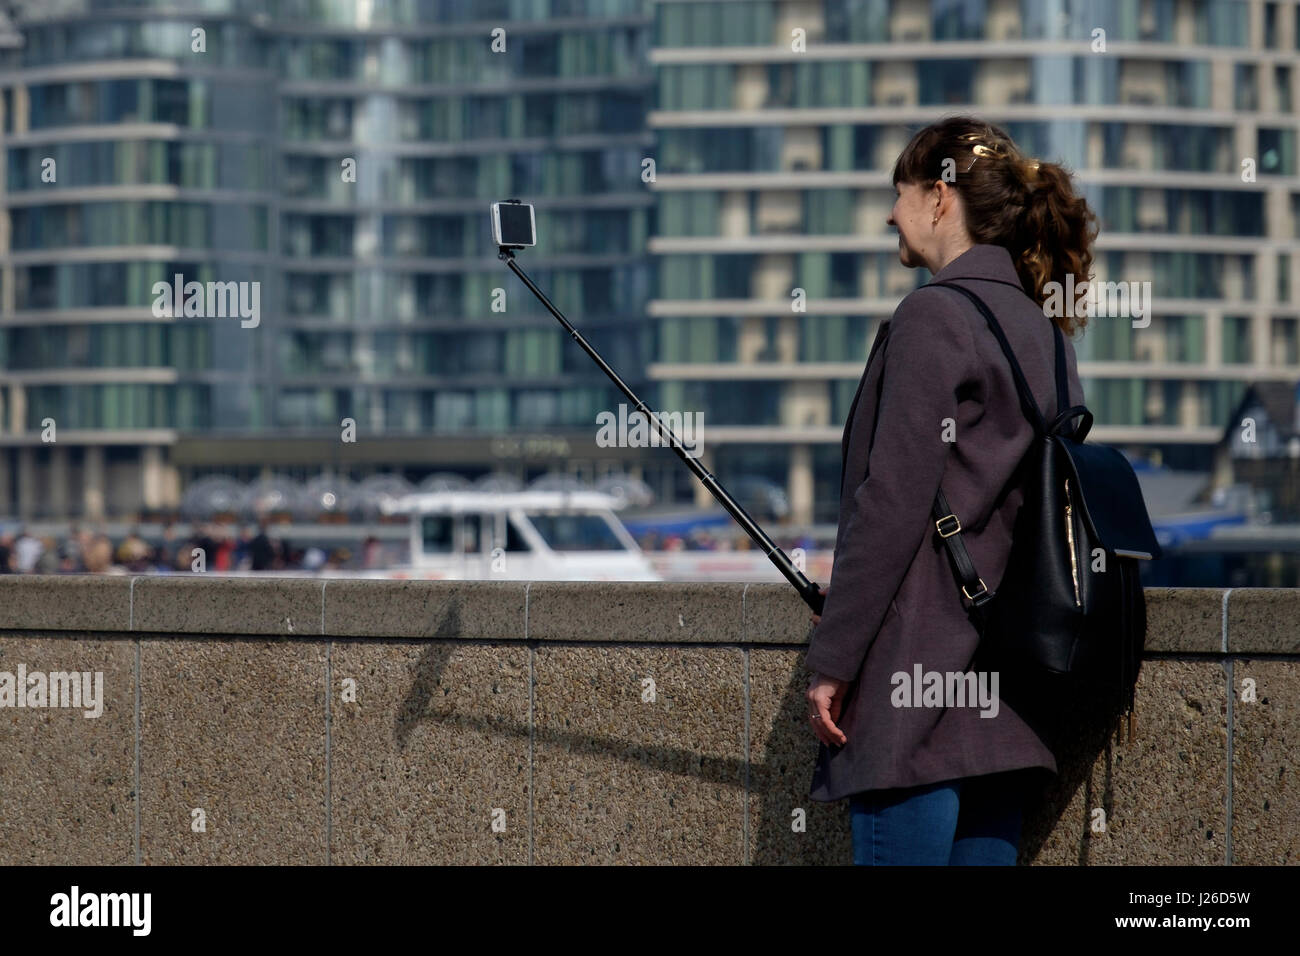 Young woman taking a selfie photo using a selfie stick Stock Photo